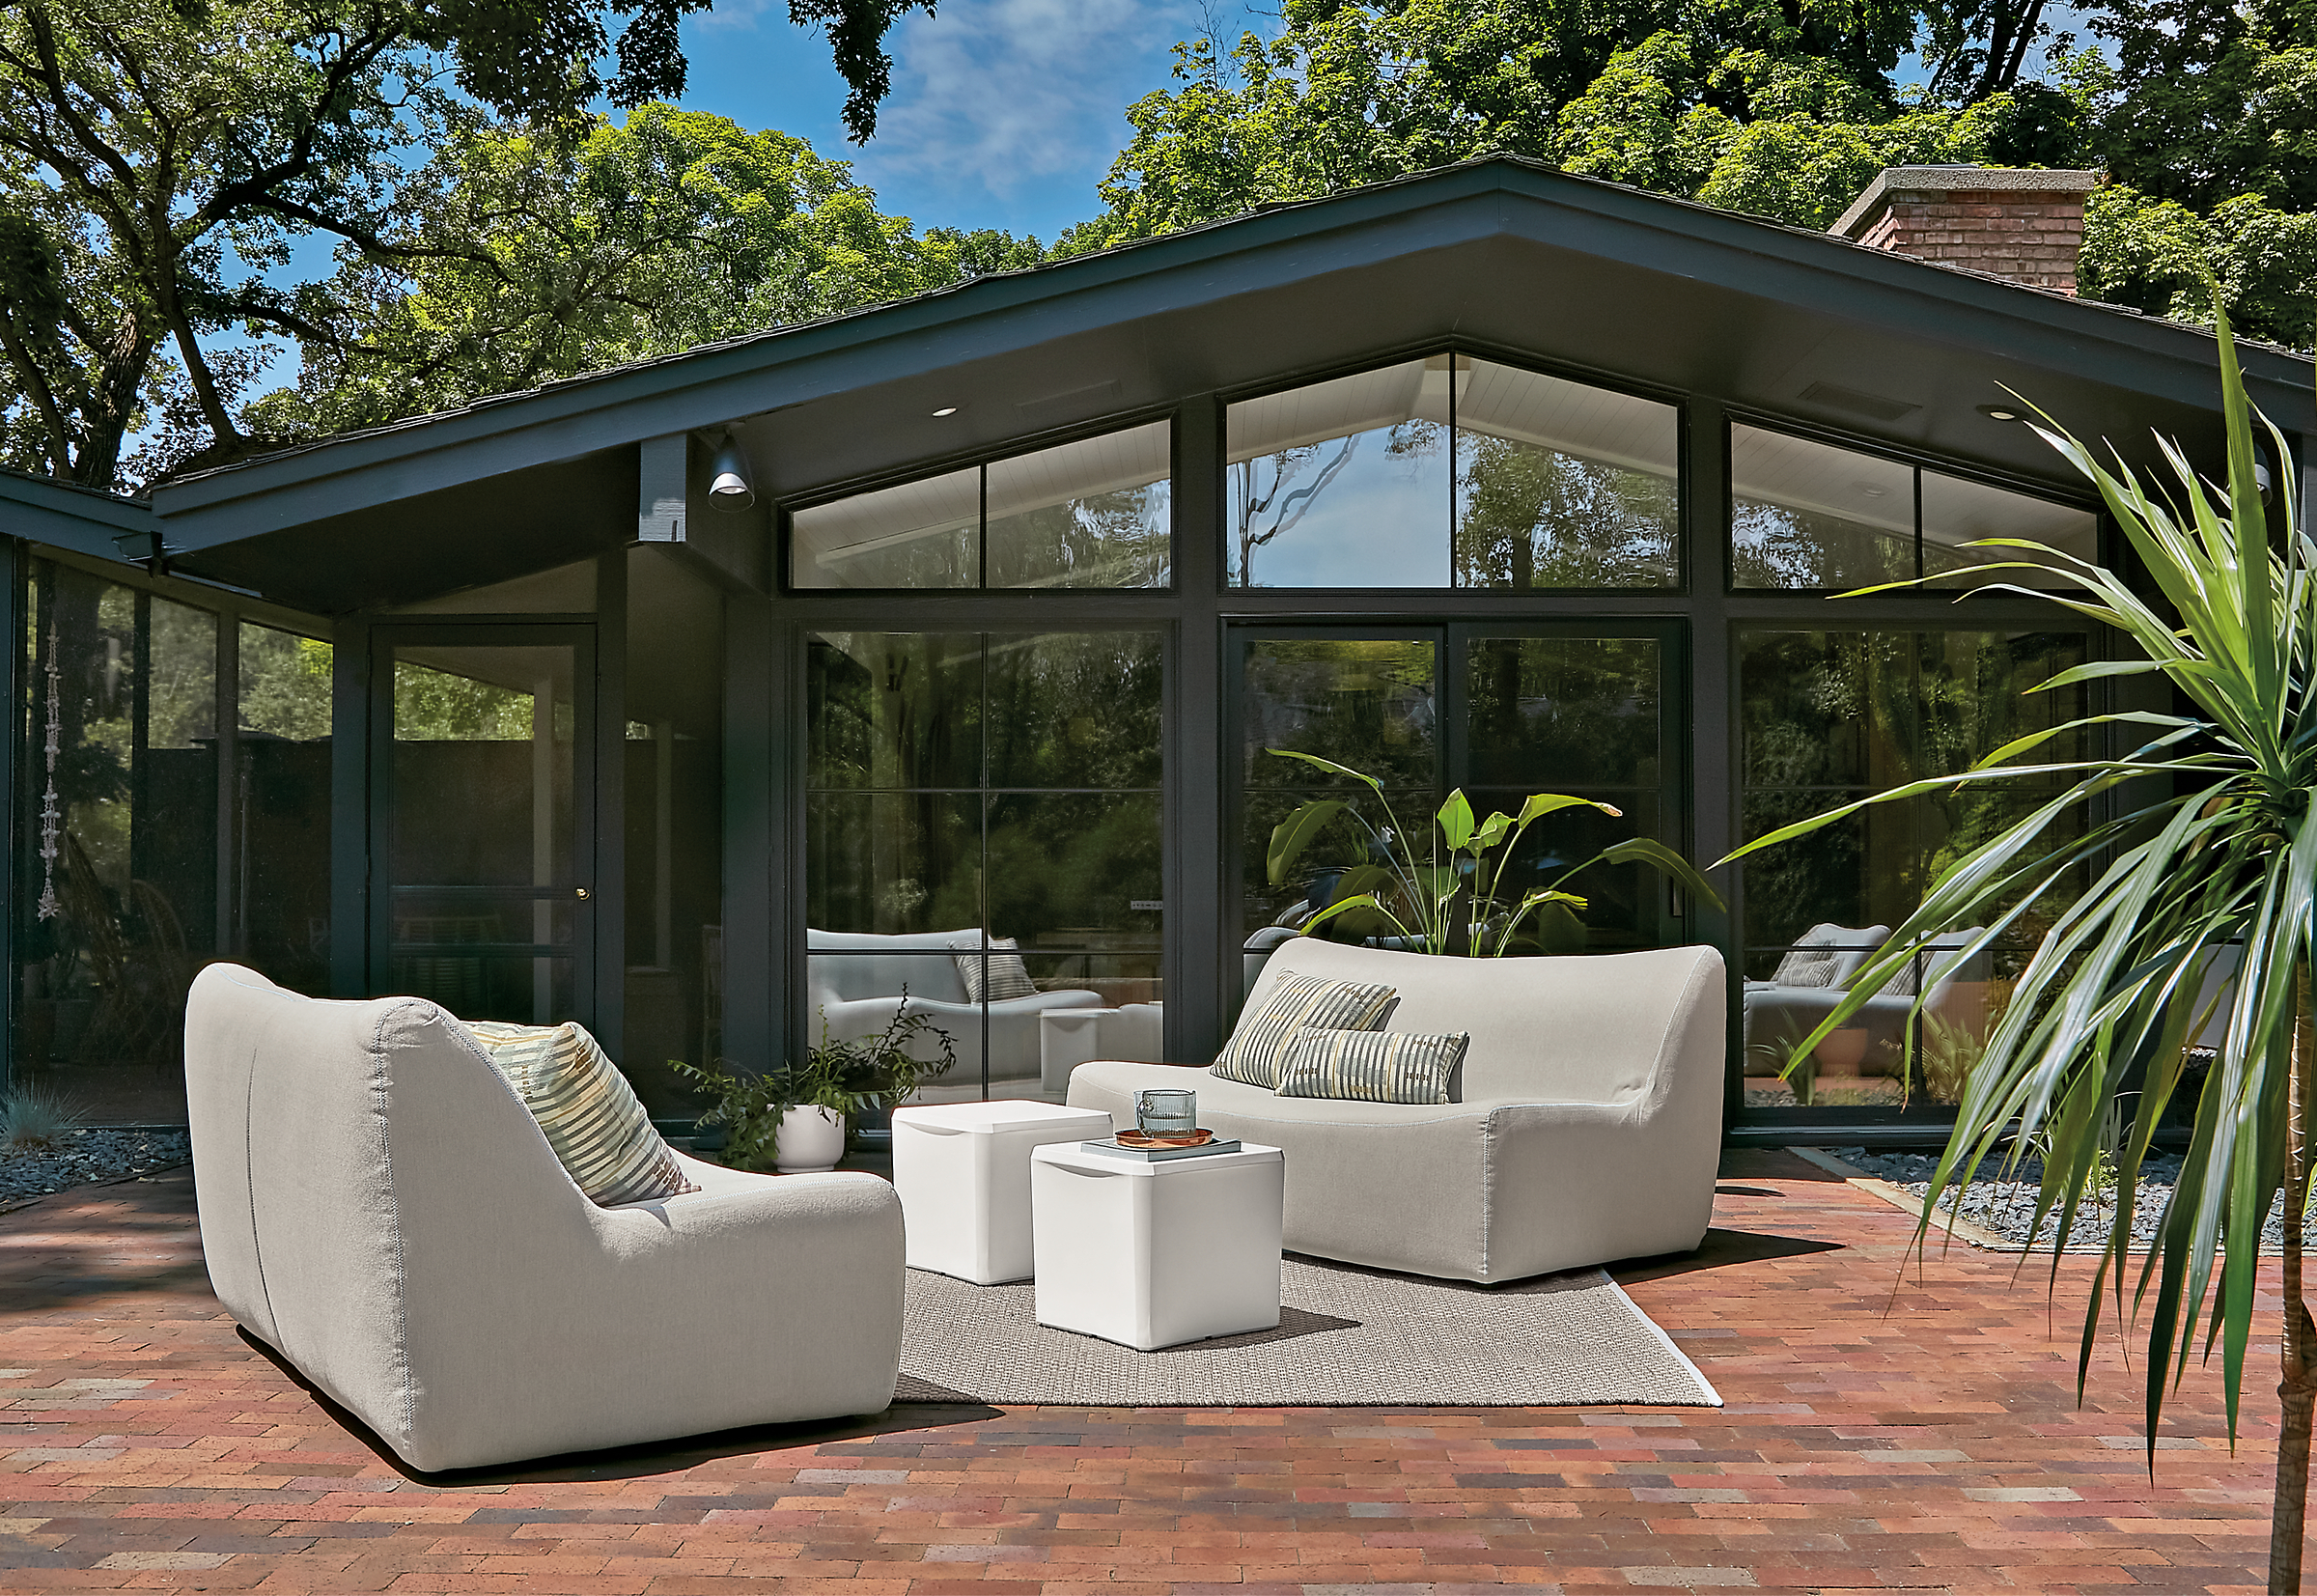 Outdoor space with two maya sofas in mist grey fabric and two cusp stools.